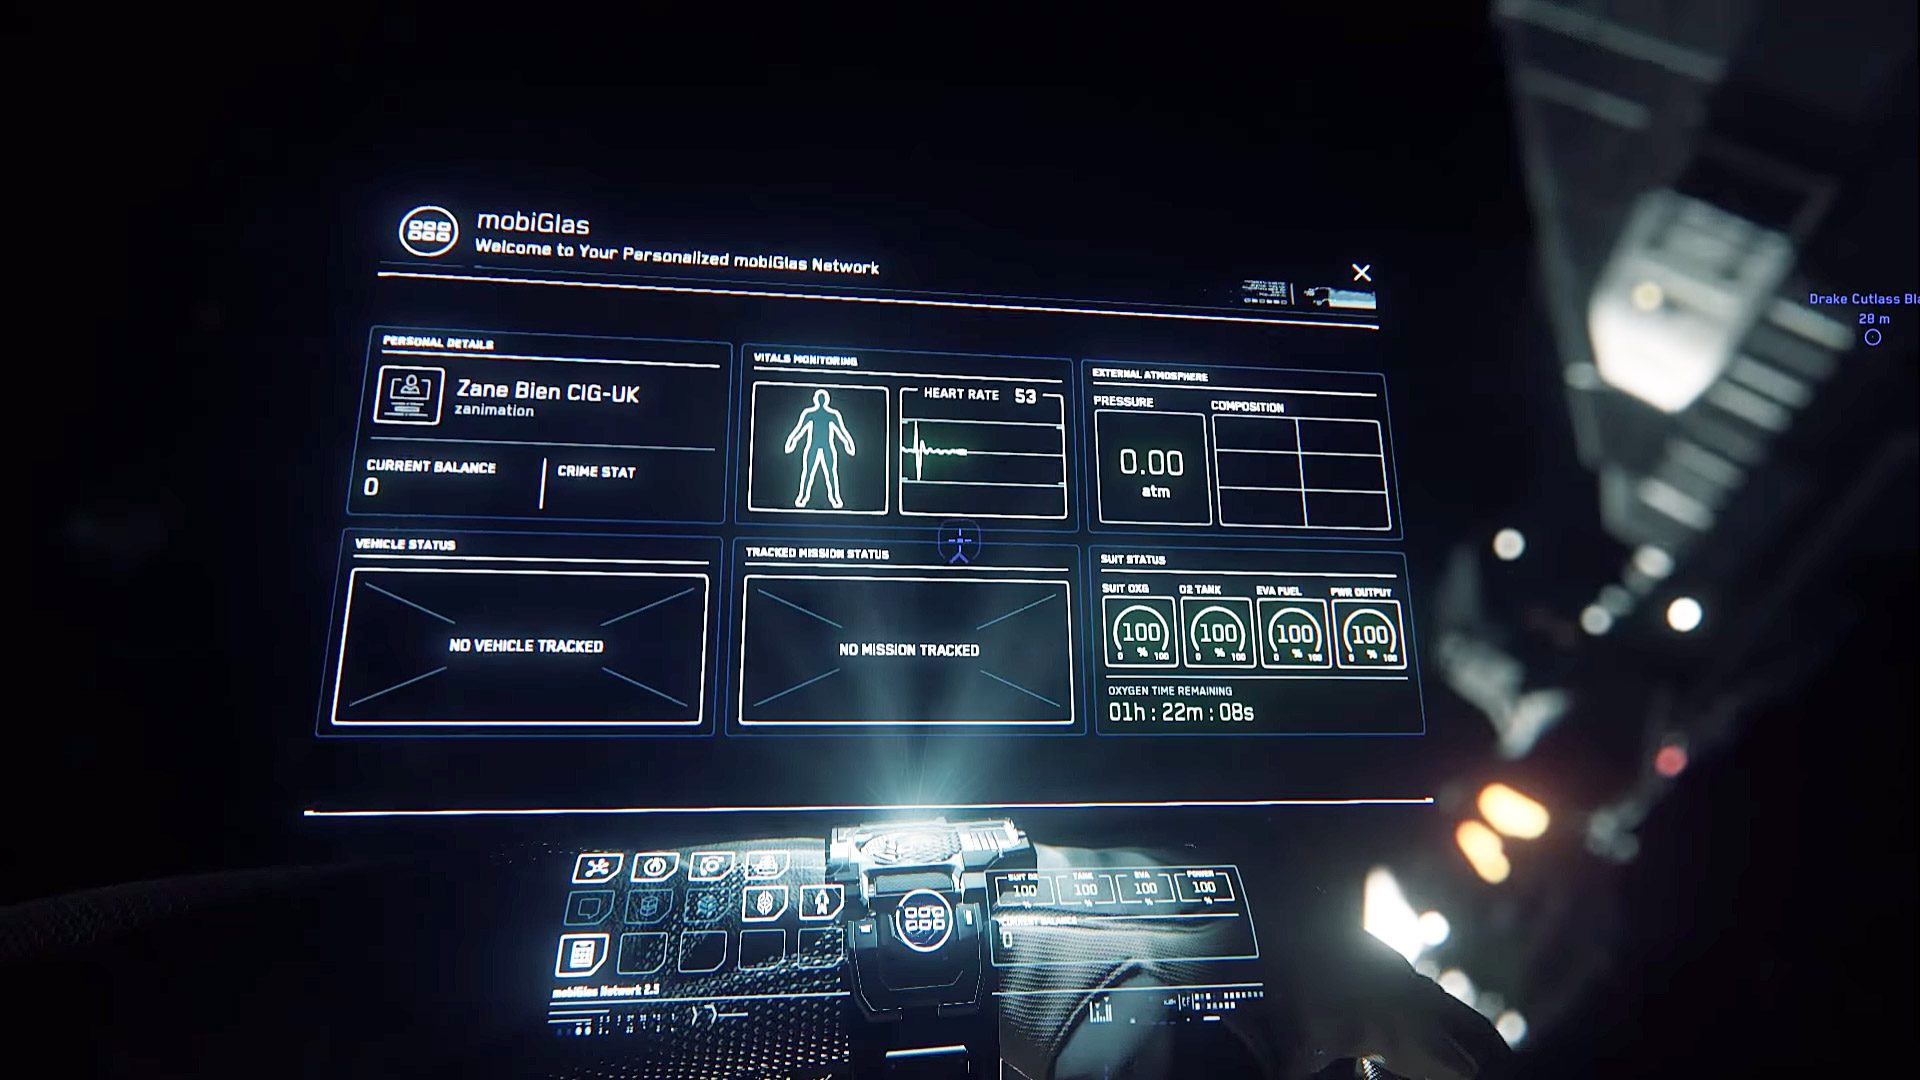 Star Citizen' Devs Affirm Support, Say New UI is Designed With VR in Mind – Road to VR